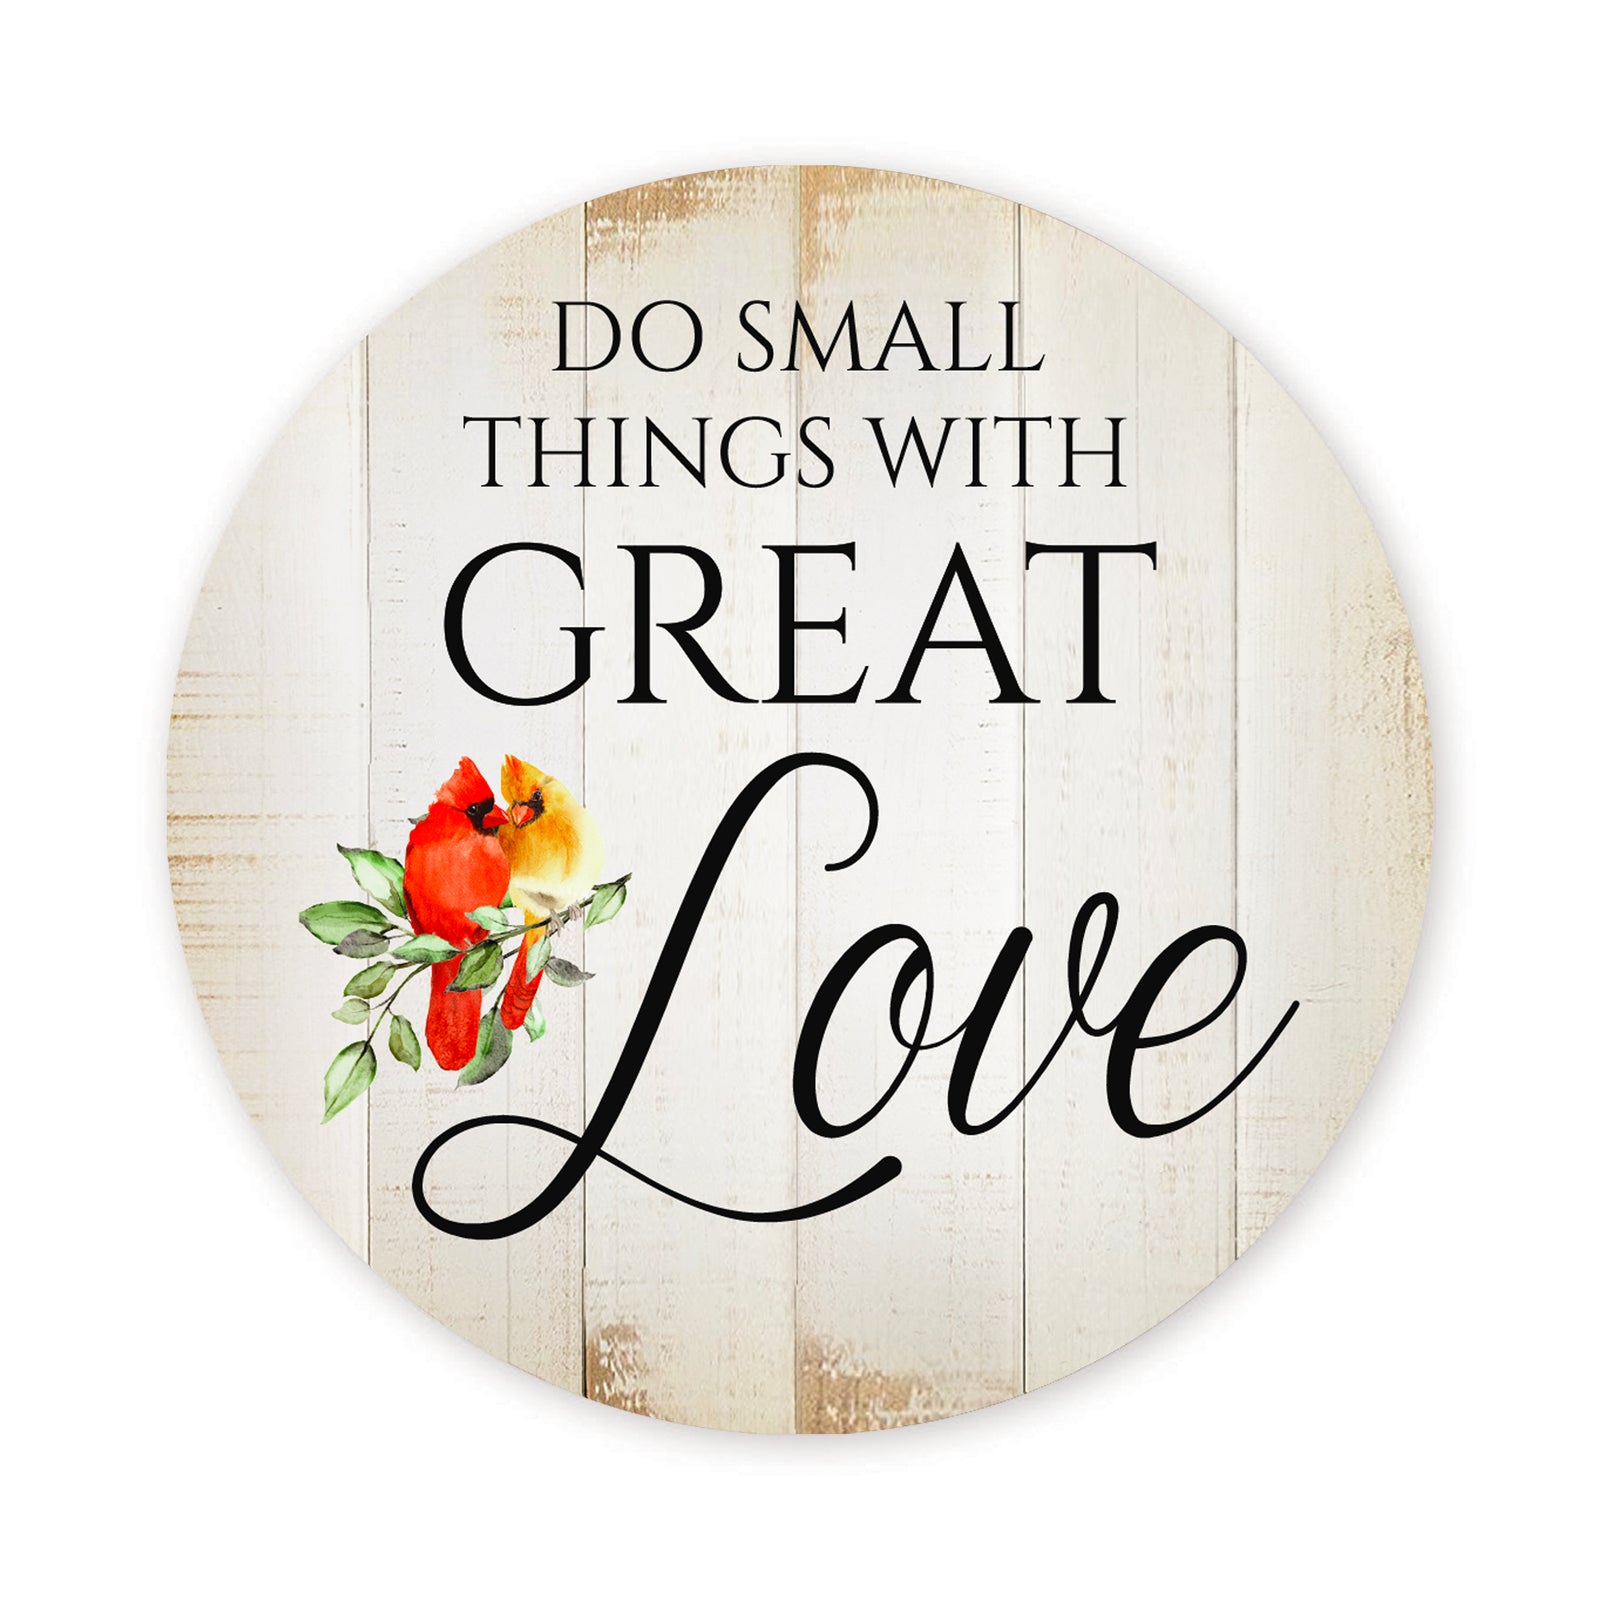 Vintage-Inspired Cardinal Wooden Magnet Printed With Everyday Inspirational Verses Gift Ideas - Do Small Things